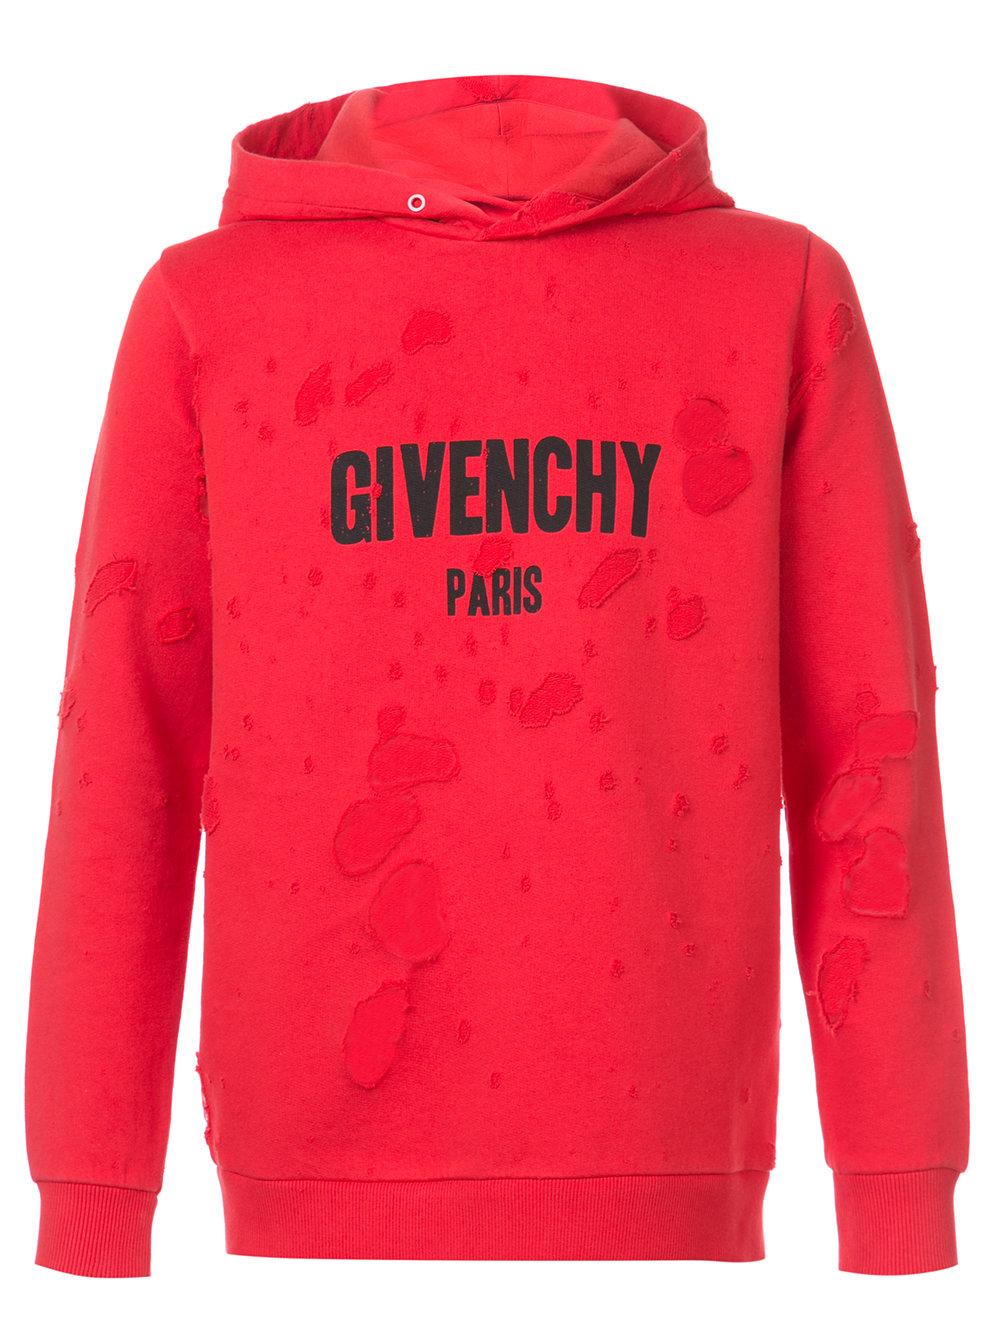 Lyst - Givenchy Distressed Logo Print Hoodie in Red for Men